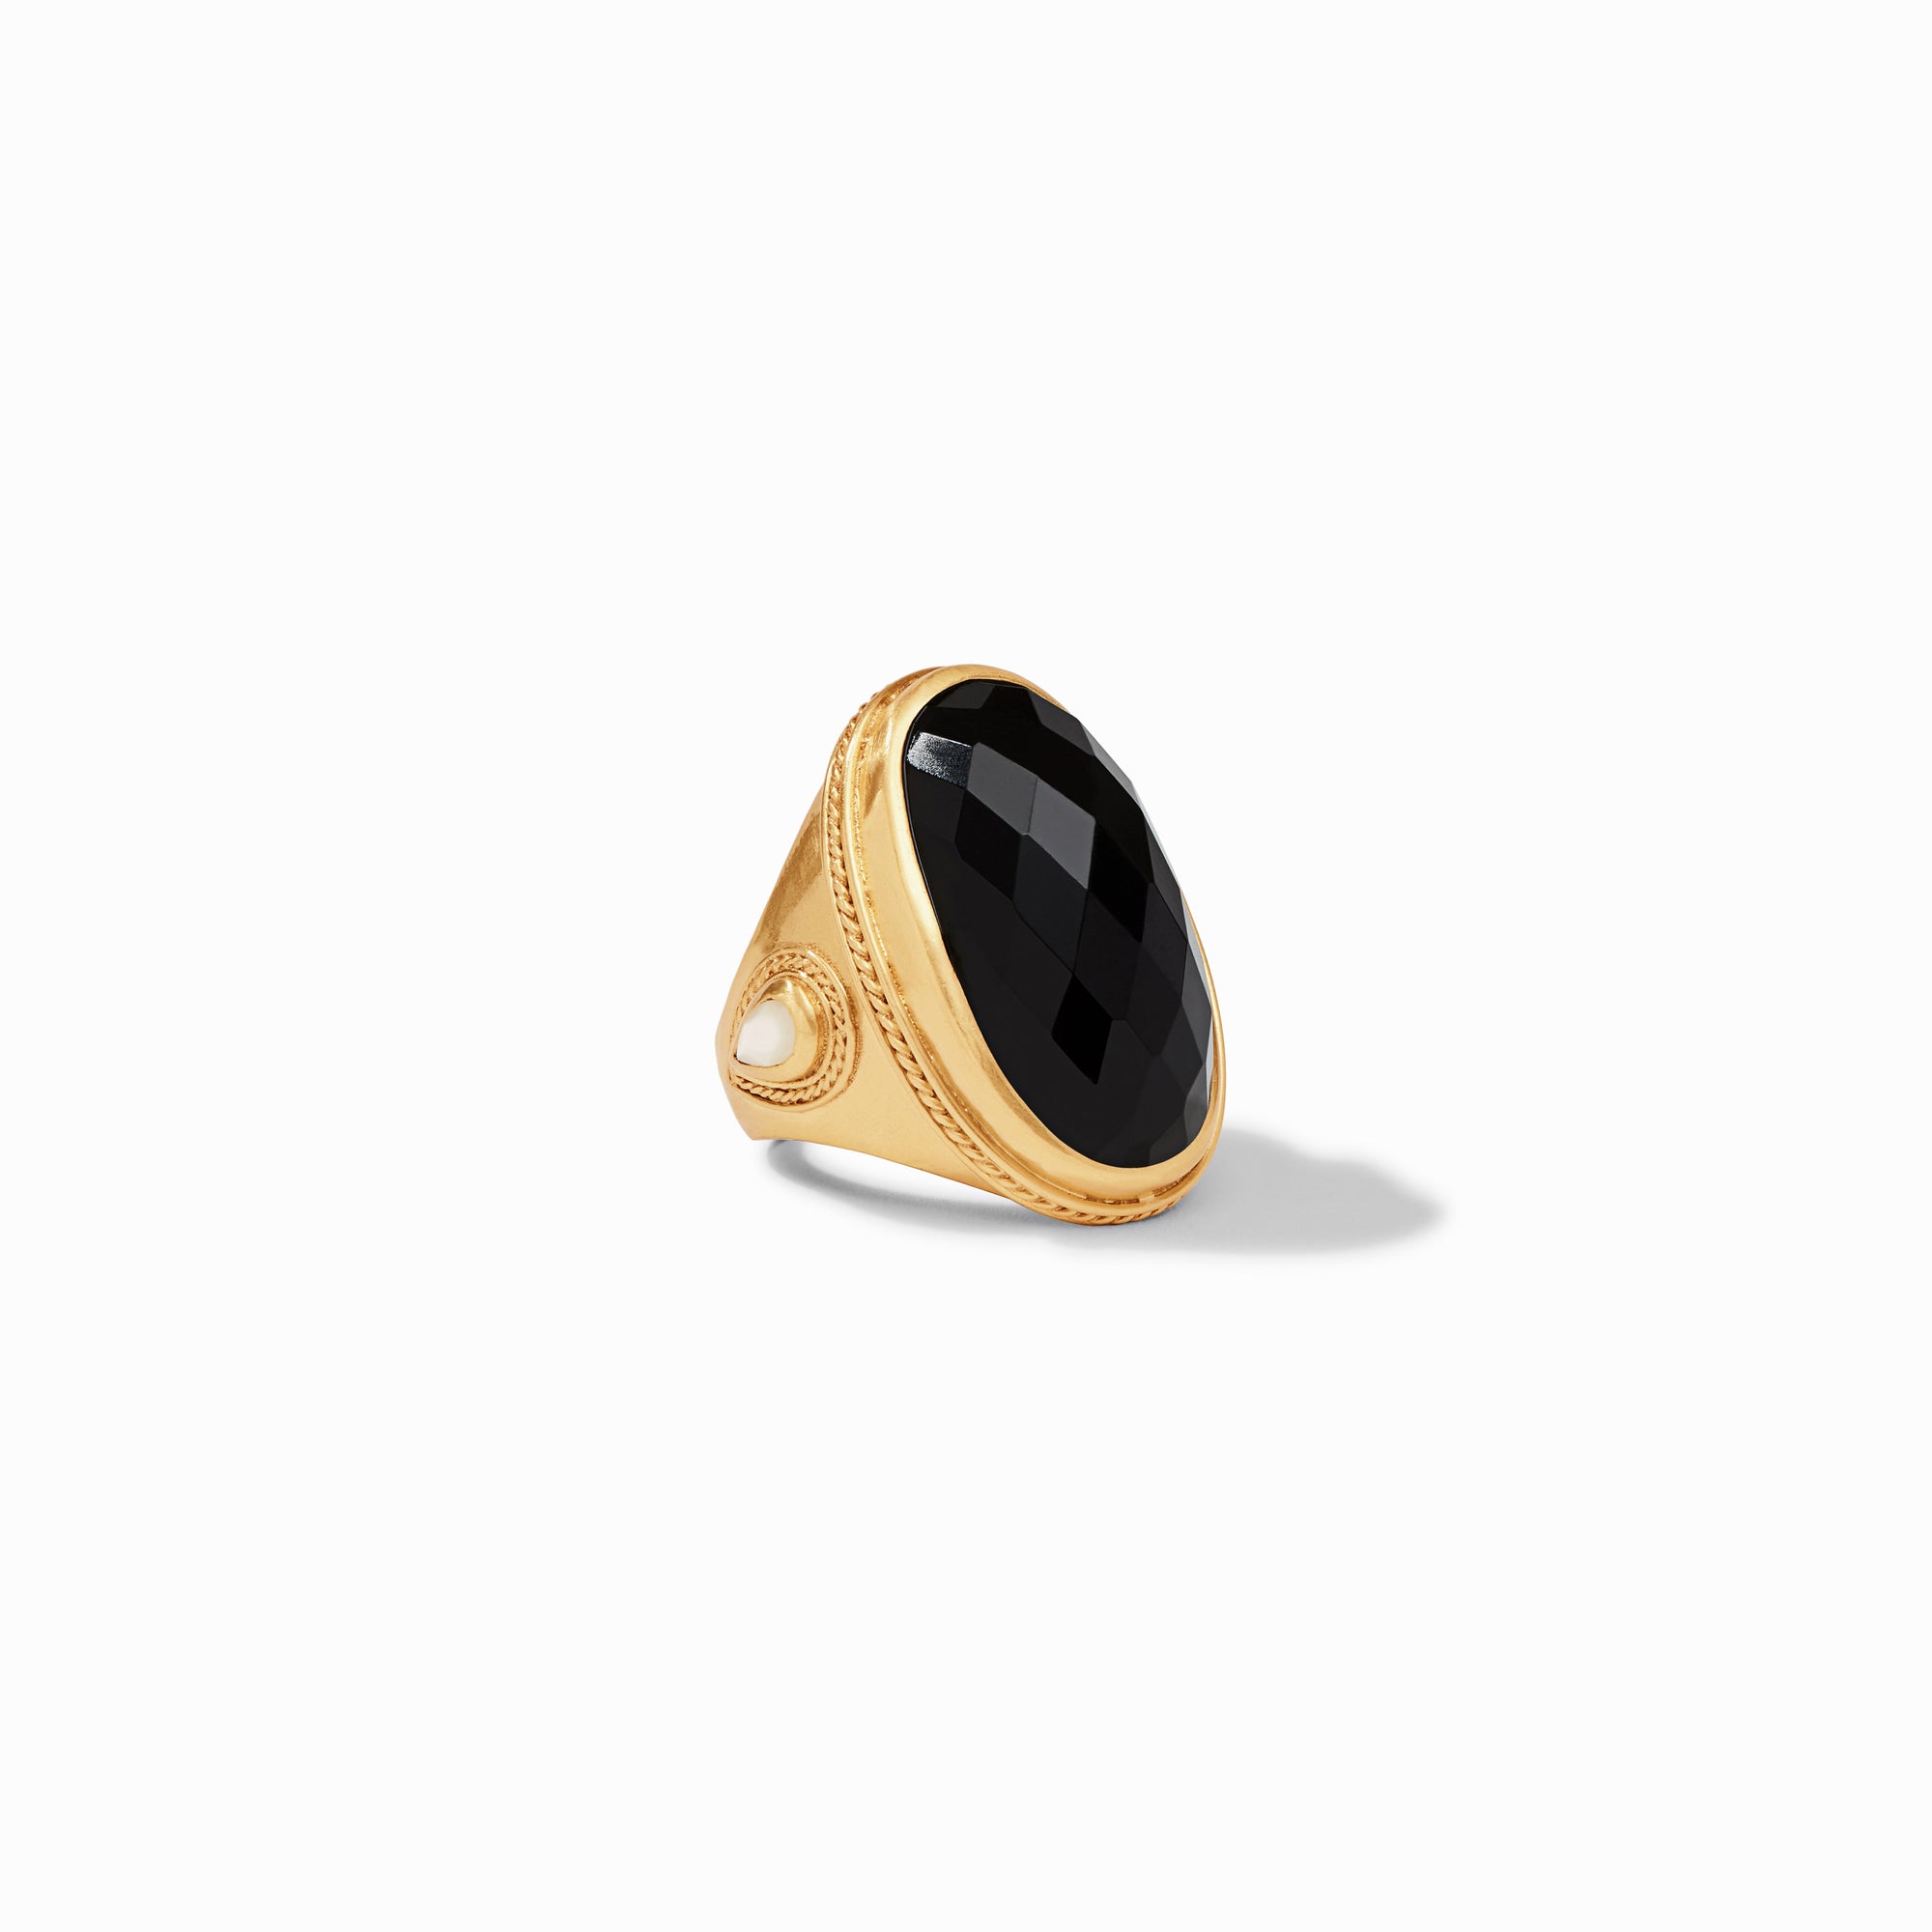 Julie Vos - Cassis Statement Ring, Obsidian Black / 8, Obsidian Black, black and white, all in the mix, obsidian black meets mixed metal, party jewels, winter edit